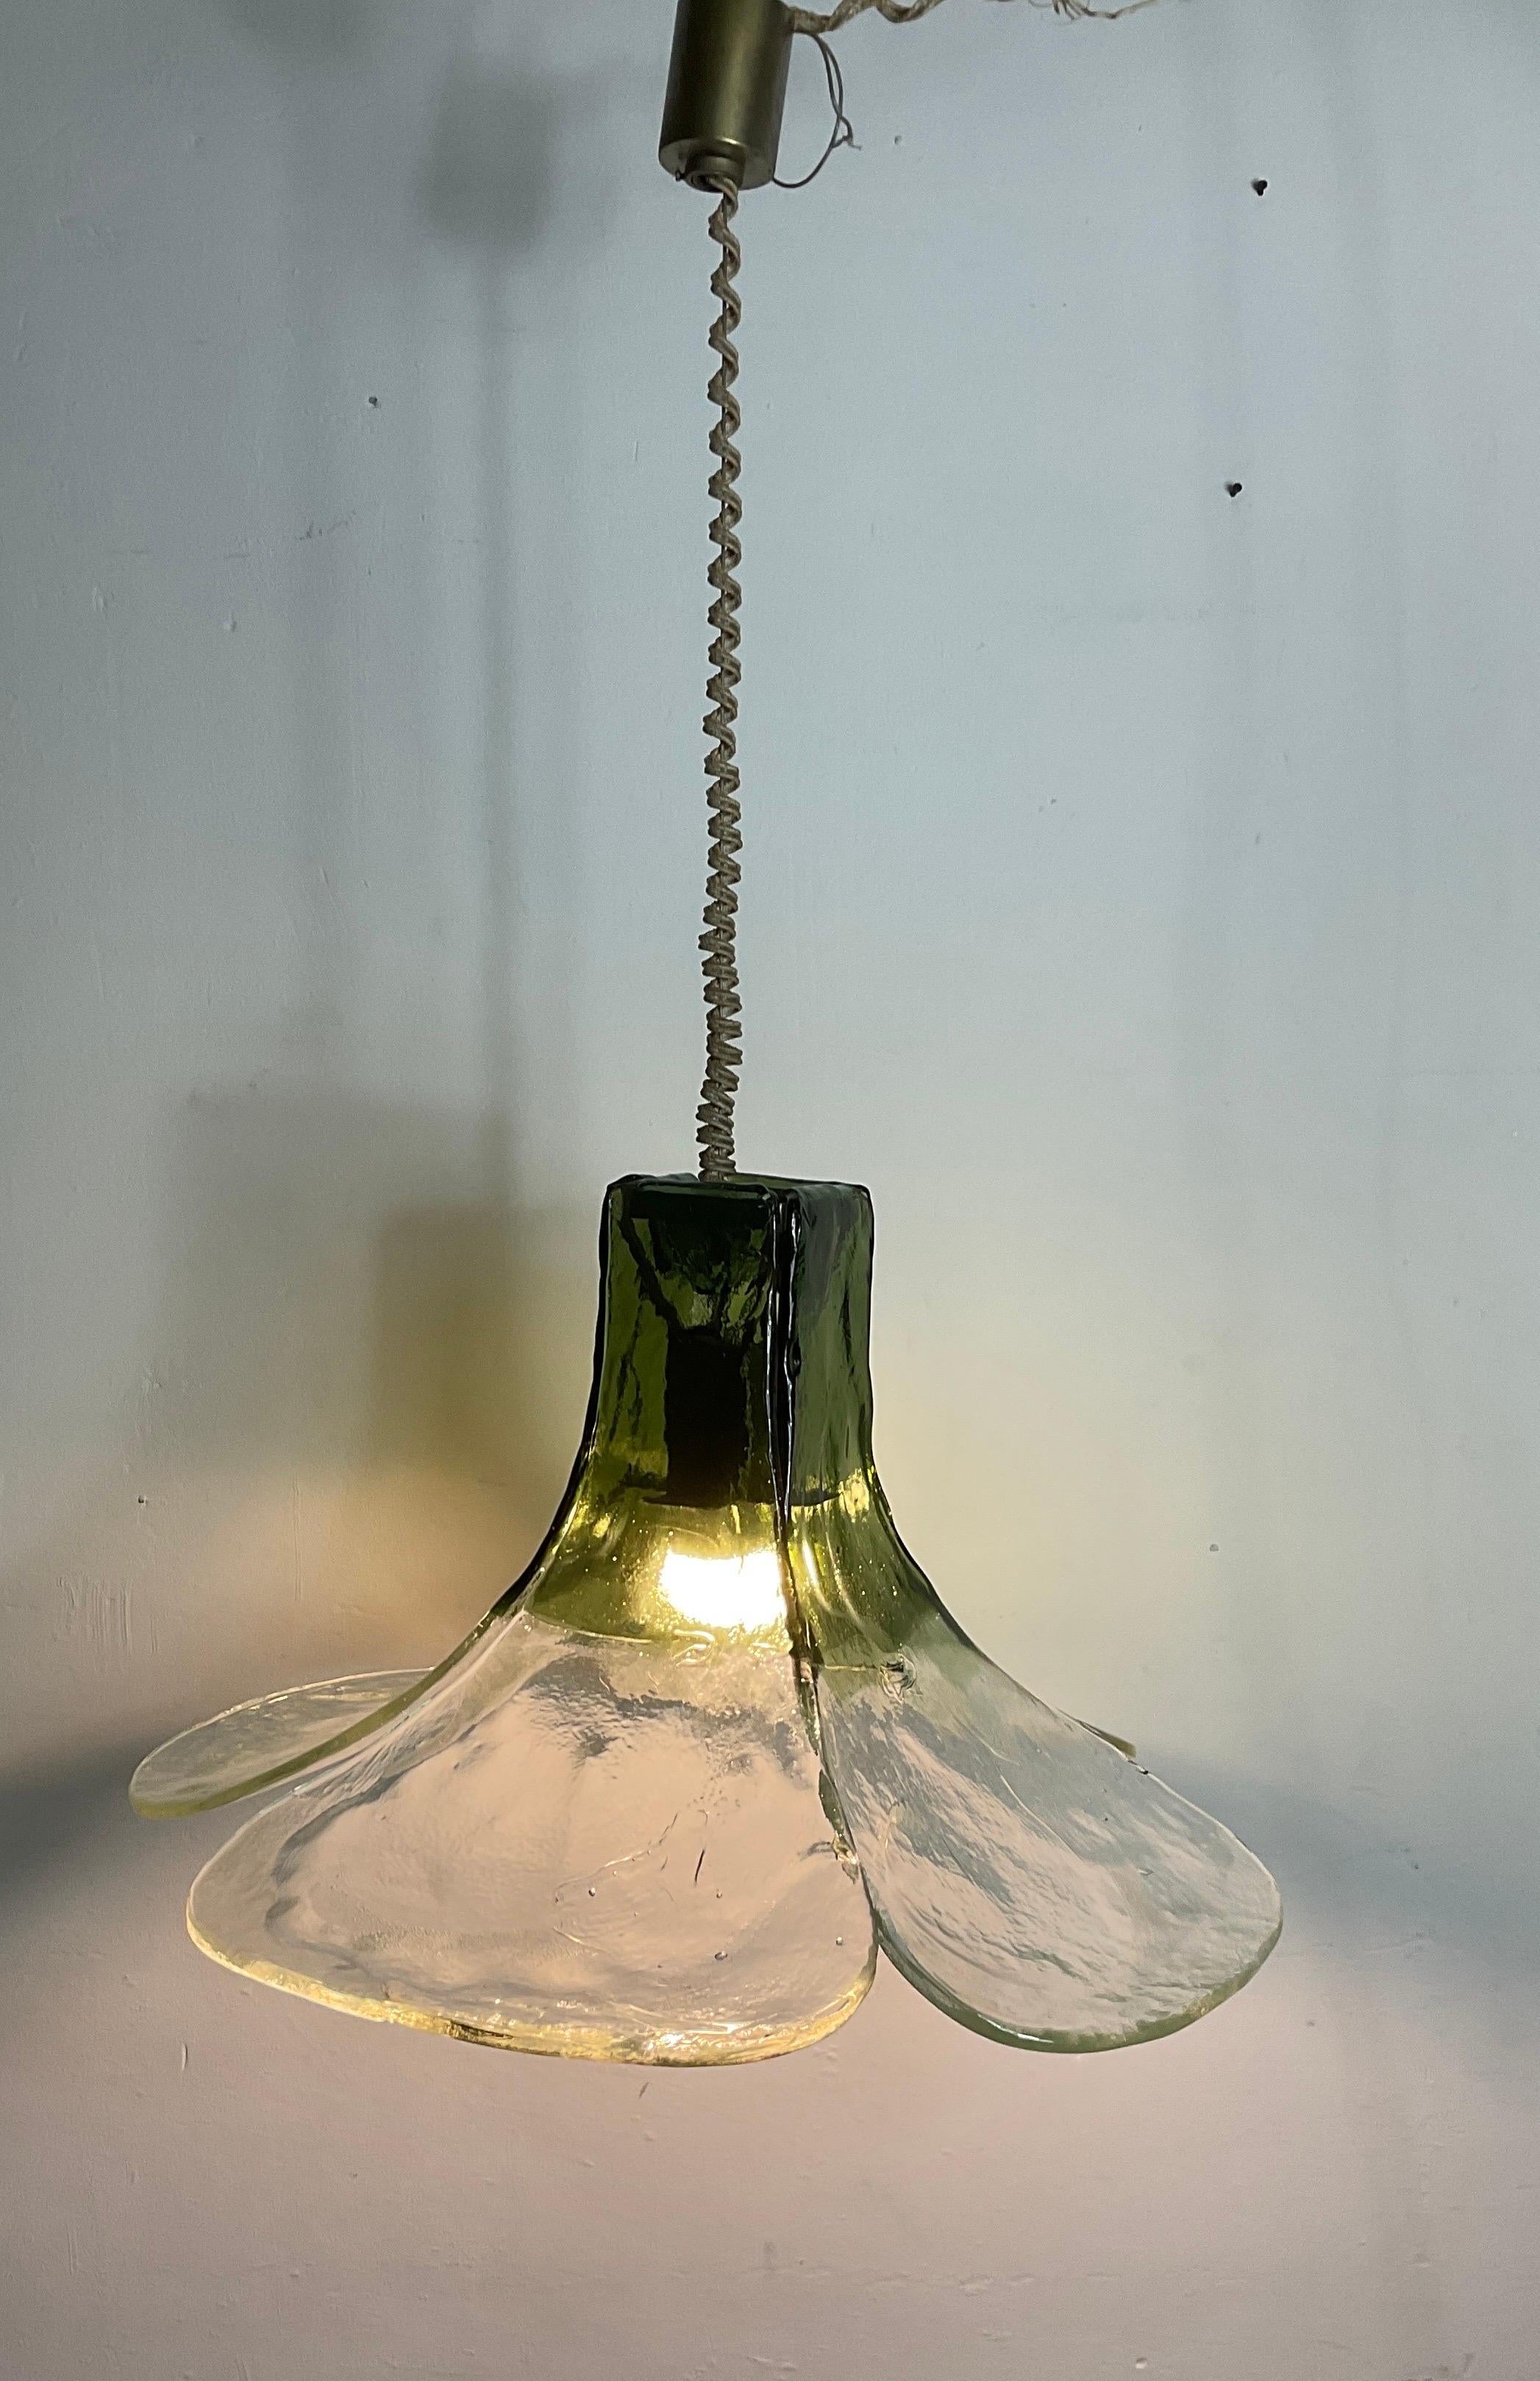 Mid-Century Shamrock Murano pendant.  Model Cascata byy Carlo Nason for Mazzega, Italy 1960s  Rare green color. For the Cascata (Italian for “waterfall”), which debuted in the 1960s, Nason achieved the effect of cascading water through an inverted